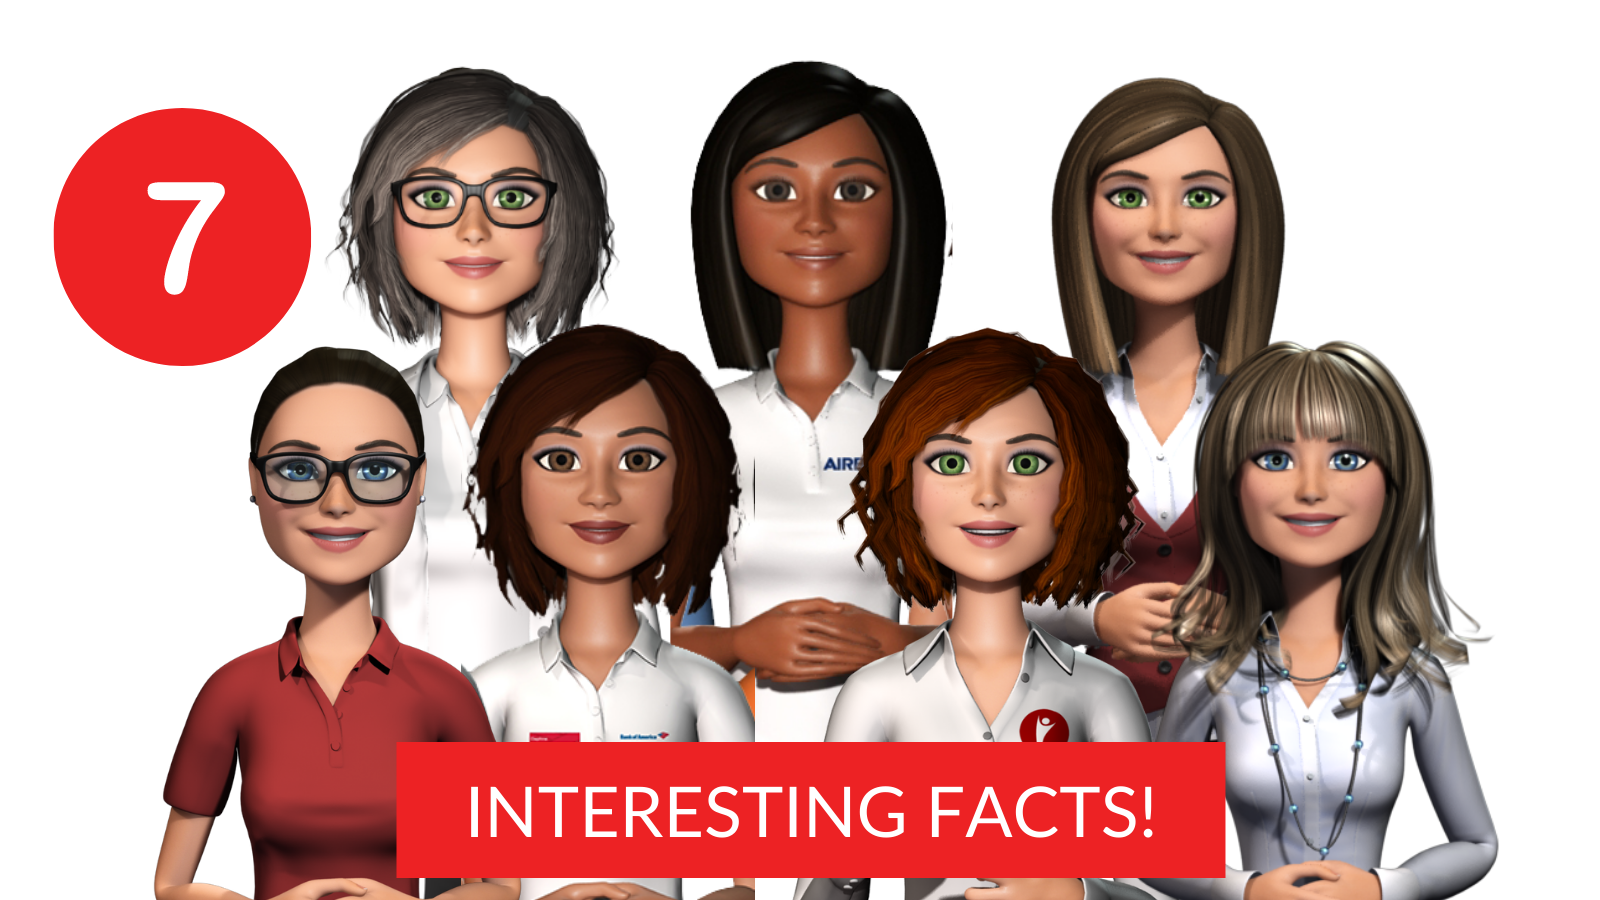 7 interesting facts about interactive avatars